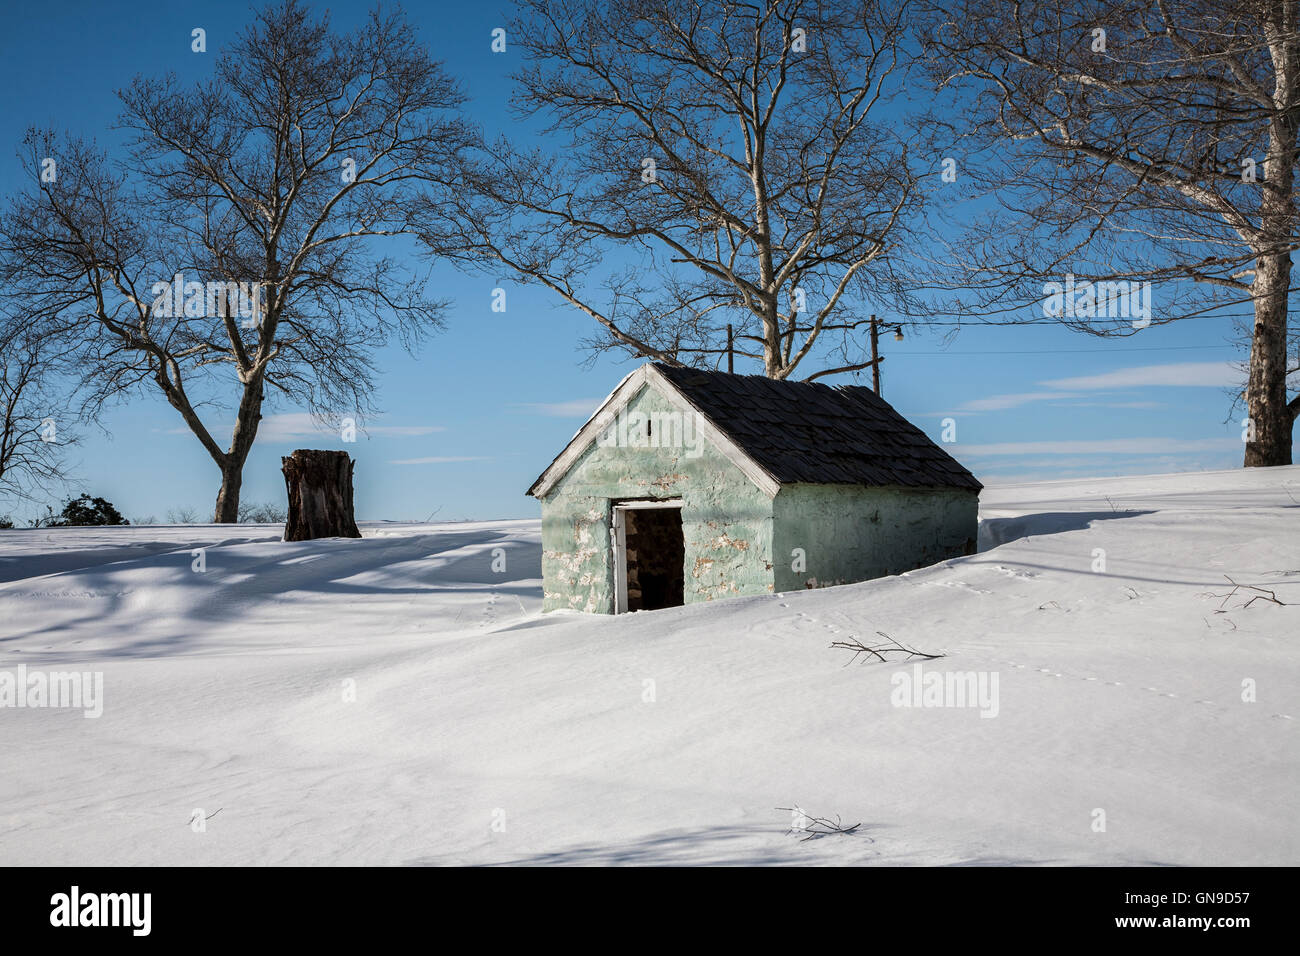 Vintage spring house exterior and blue sky snow storm scene in rural Monmouth County, New Jersey, NJ, USA, North America winter landscape house scene Stock Photo